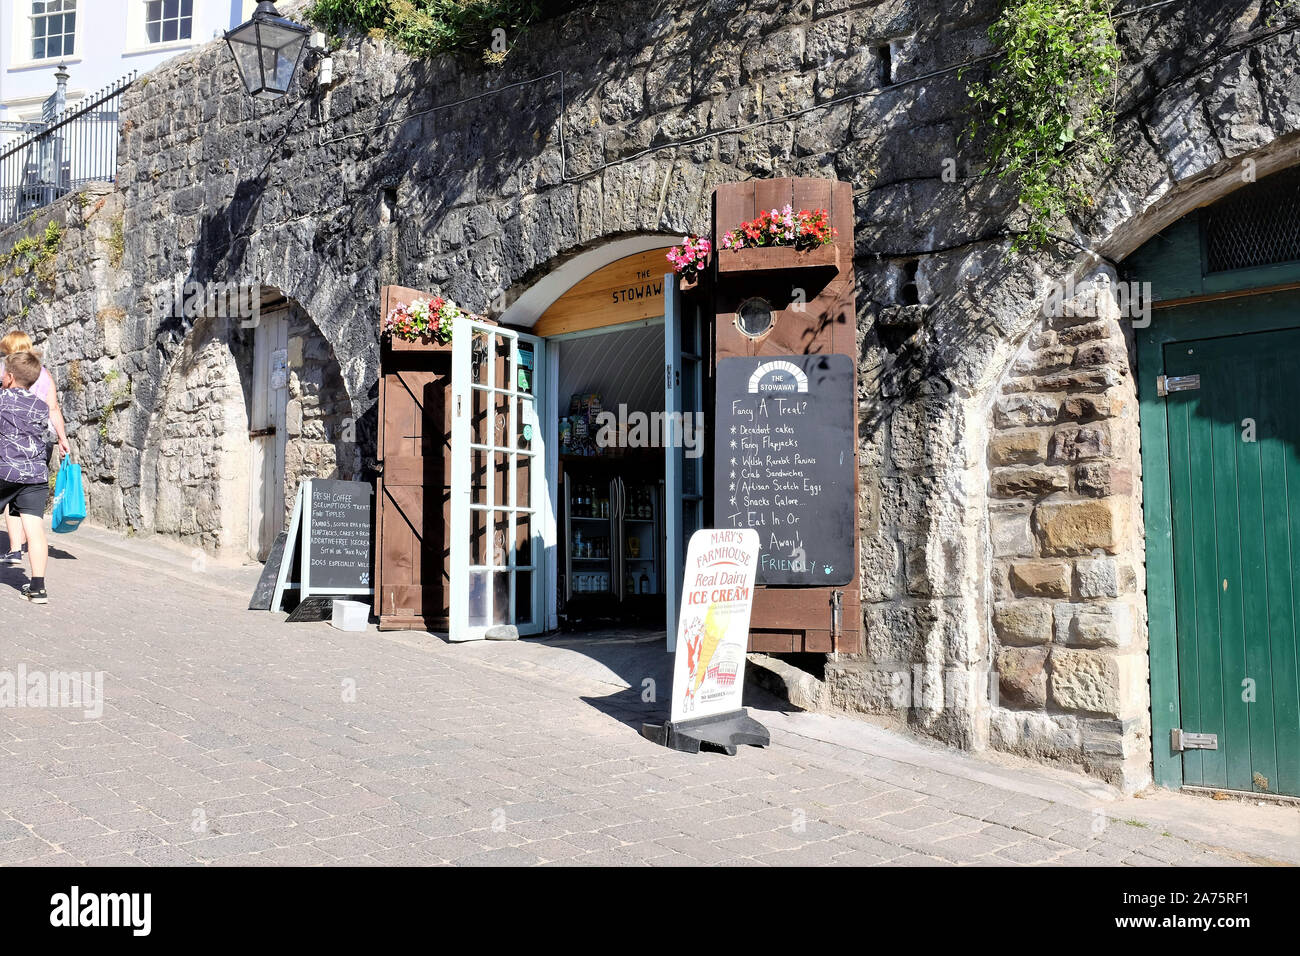 Tenby, Wales. July 25, 2018. holidaymakers walk past a shop and cafe in the arches on Penniless Cove hill beside the harbour at Tenby in South Wales, Stock Photo